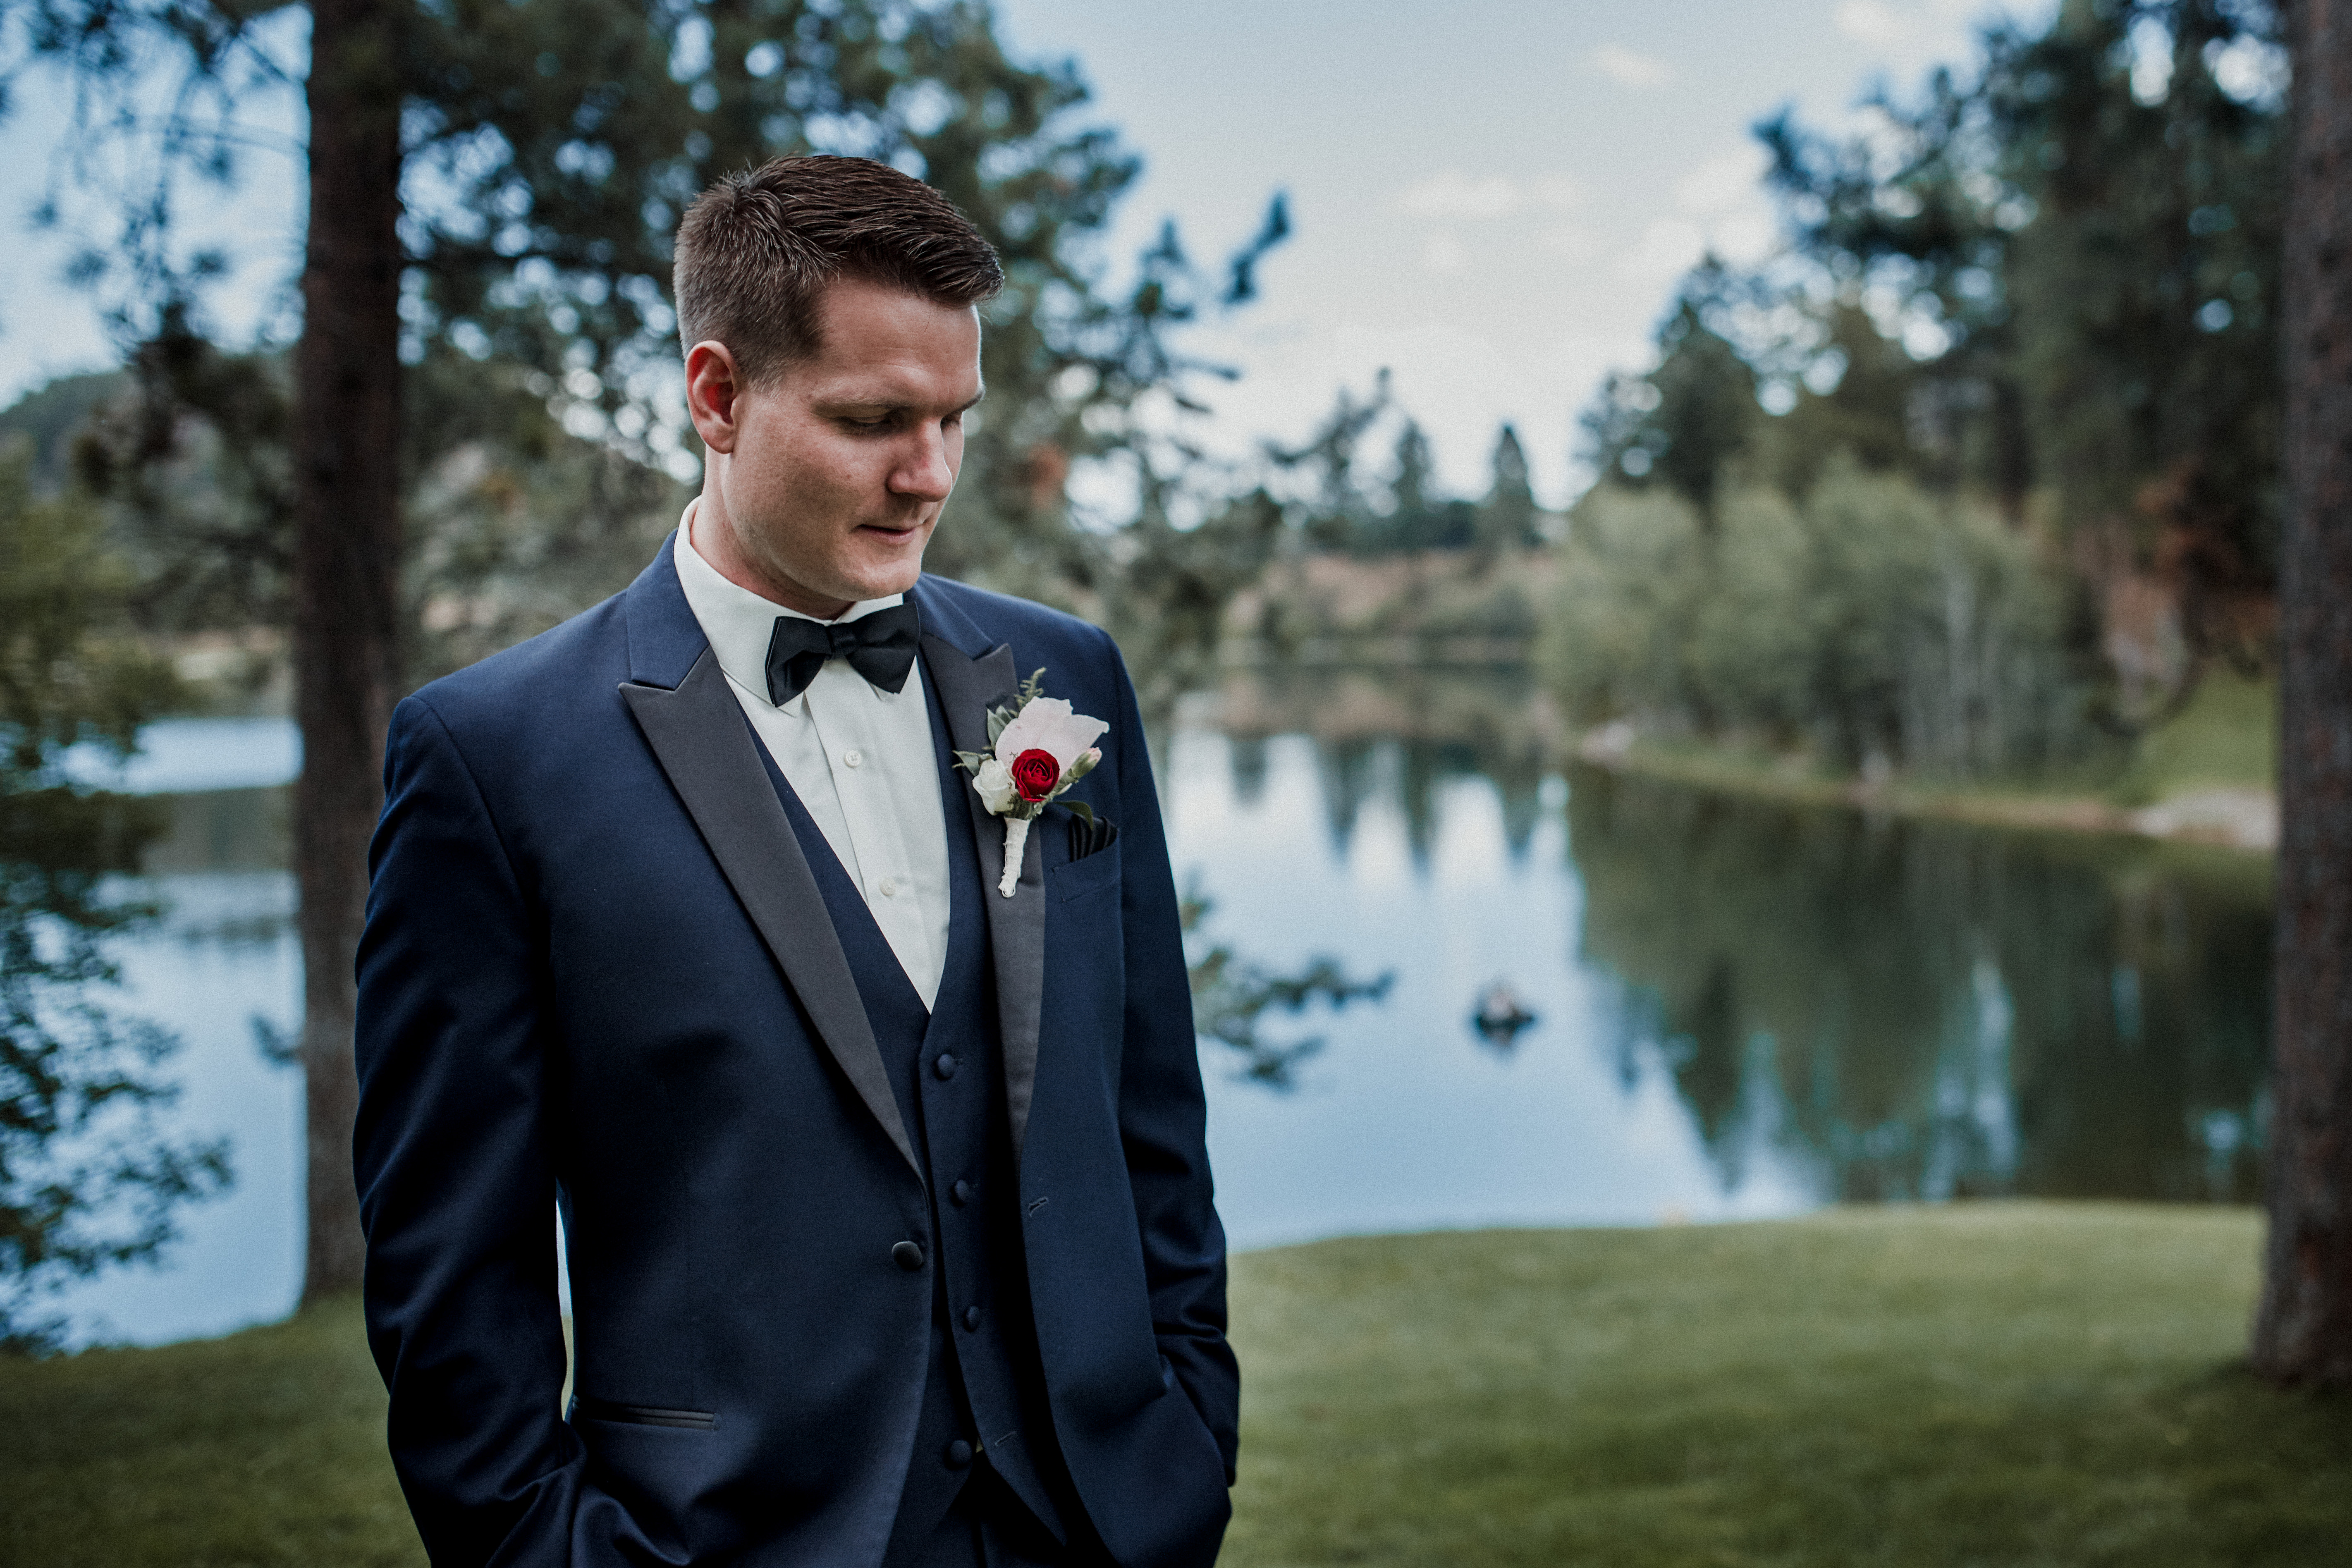 A groom looks forelorn as he awaits by a pond for his bride to arrive.